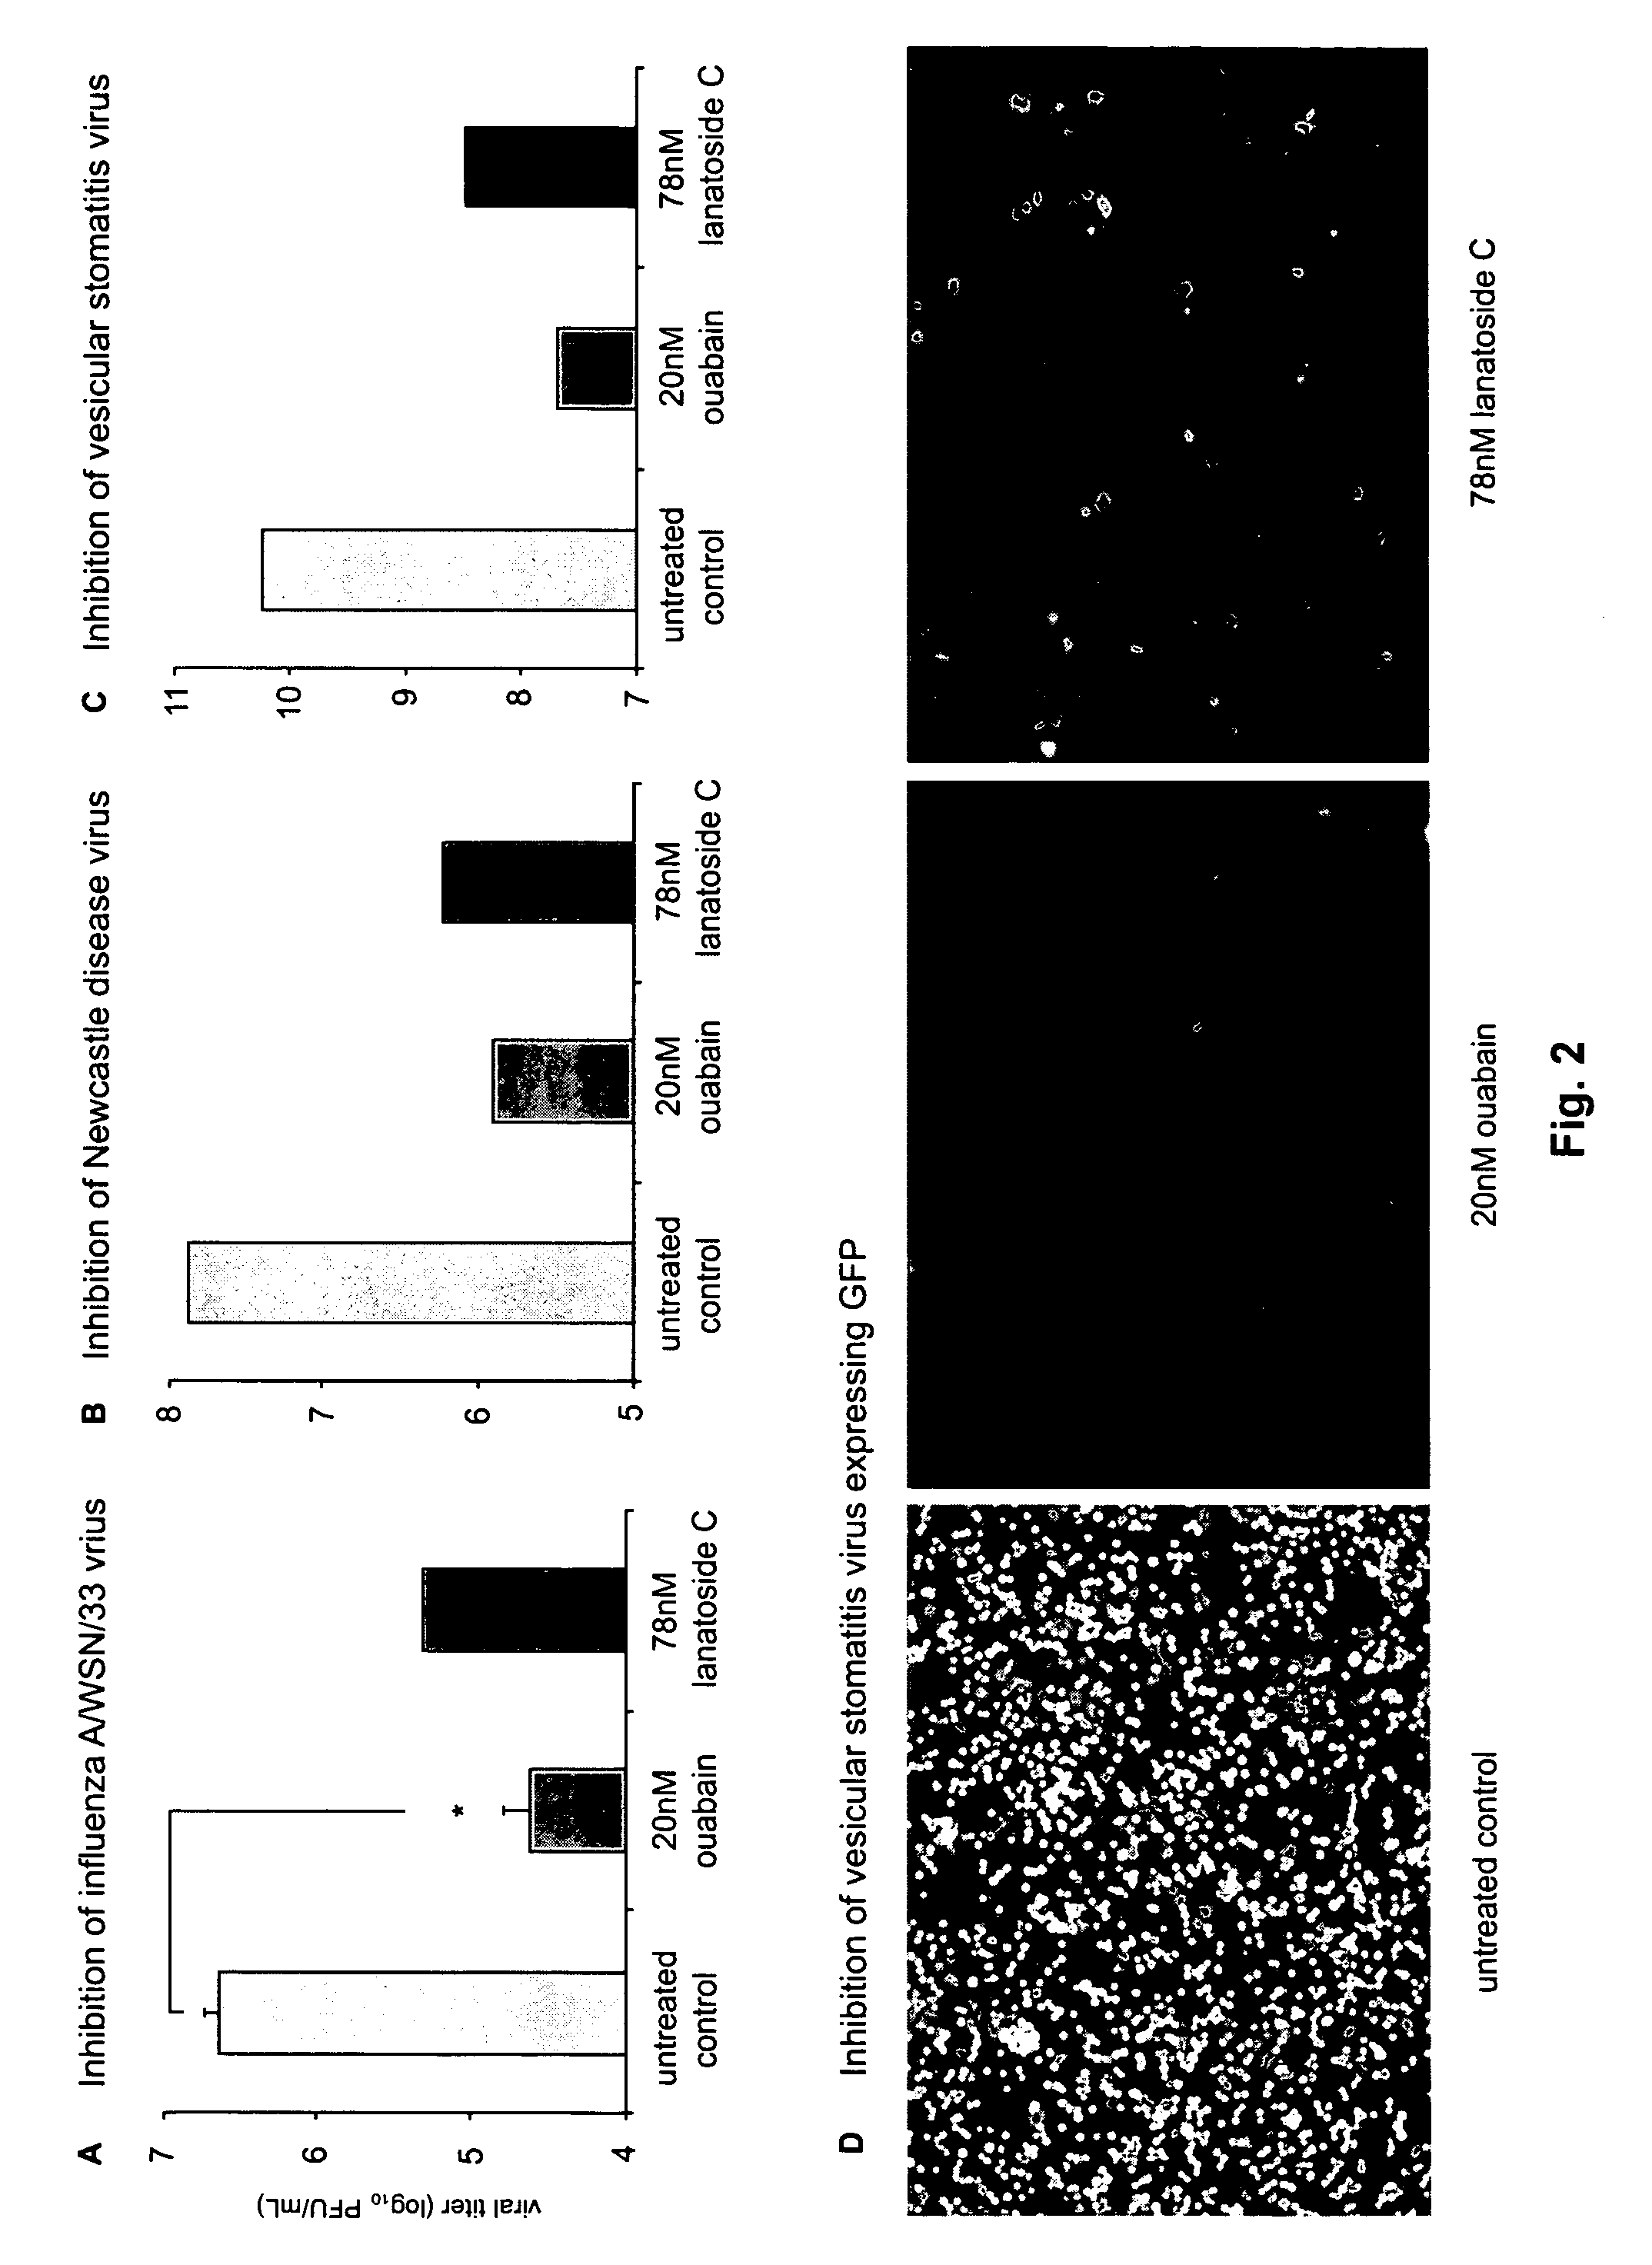 Compounds that modulate negative-sense, single-stranded RNA virus replication and uses thereof